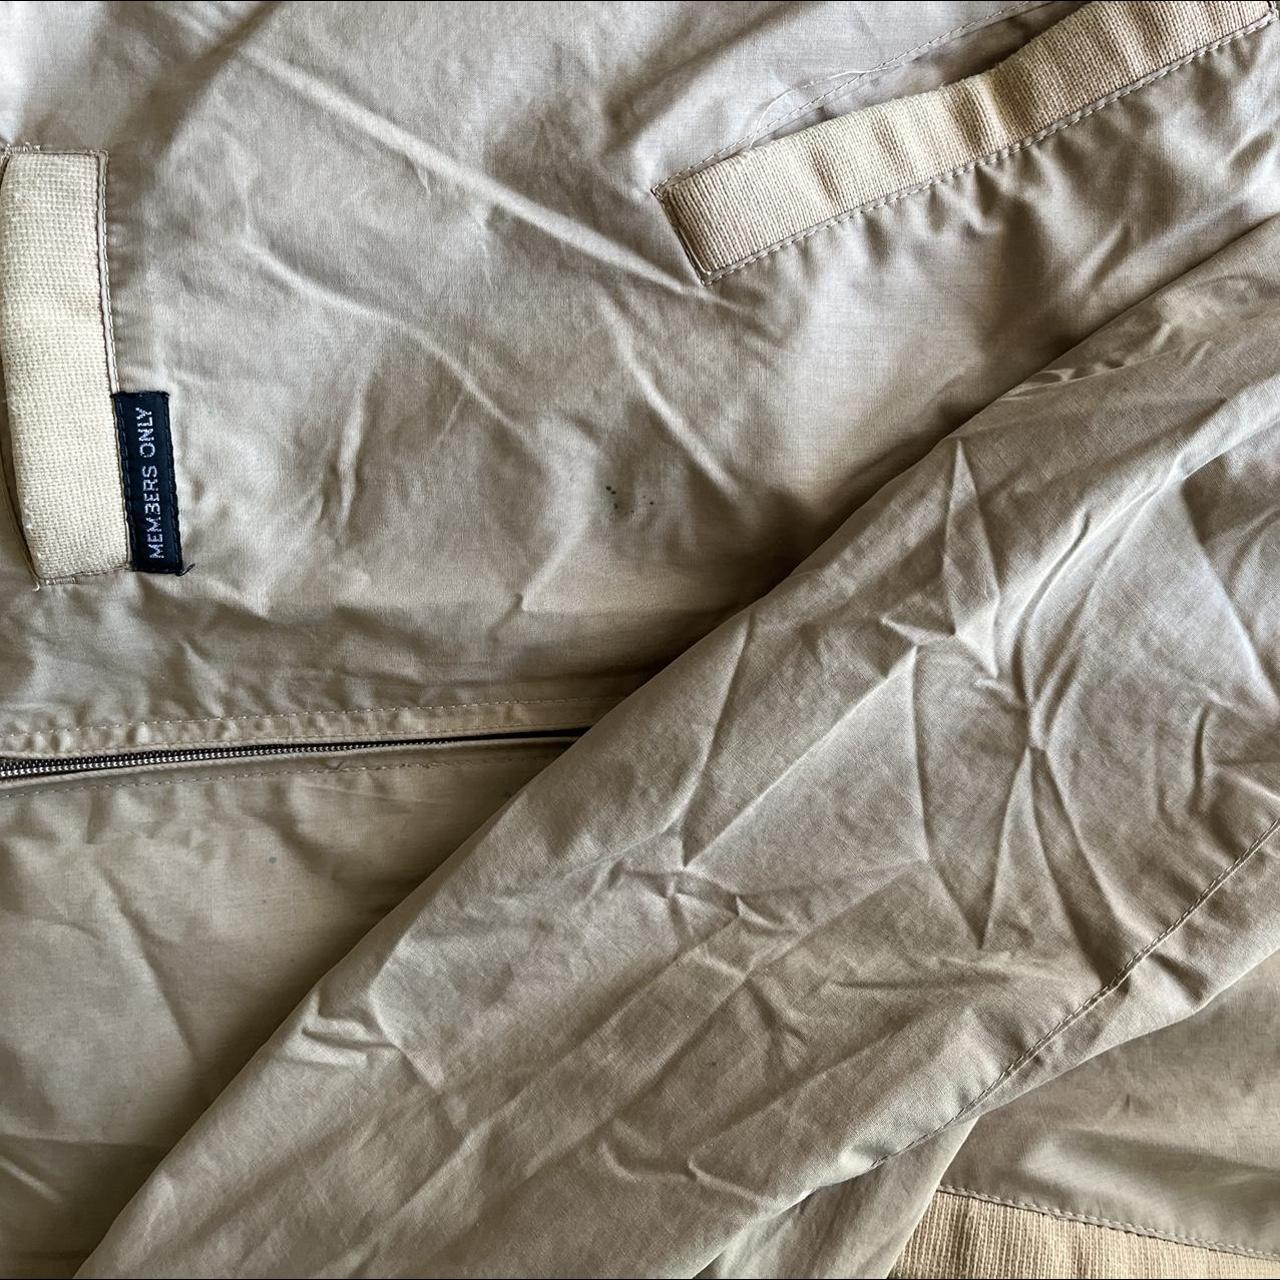 Members Only Men's Tan and Cream Jacket (3)